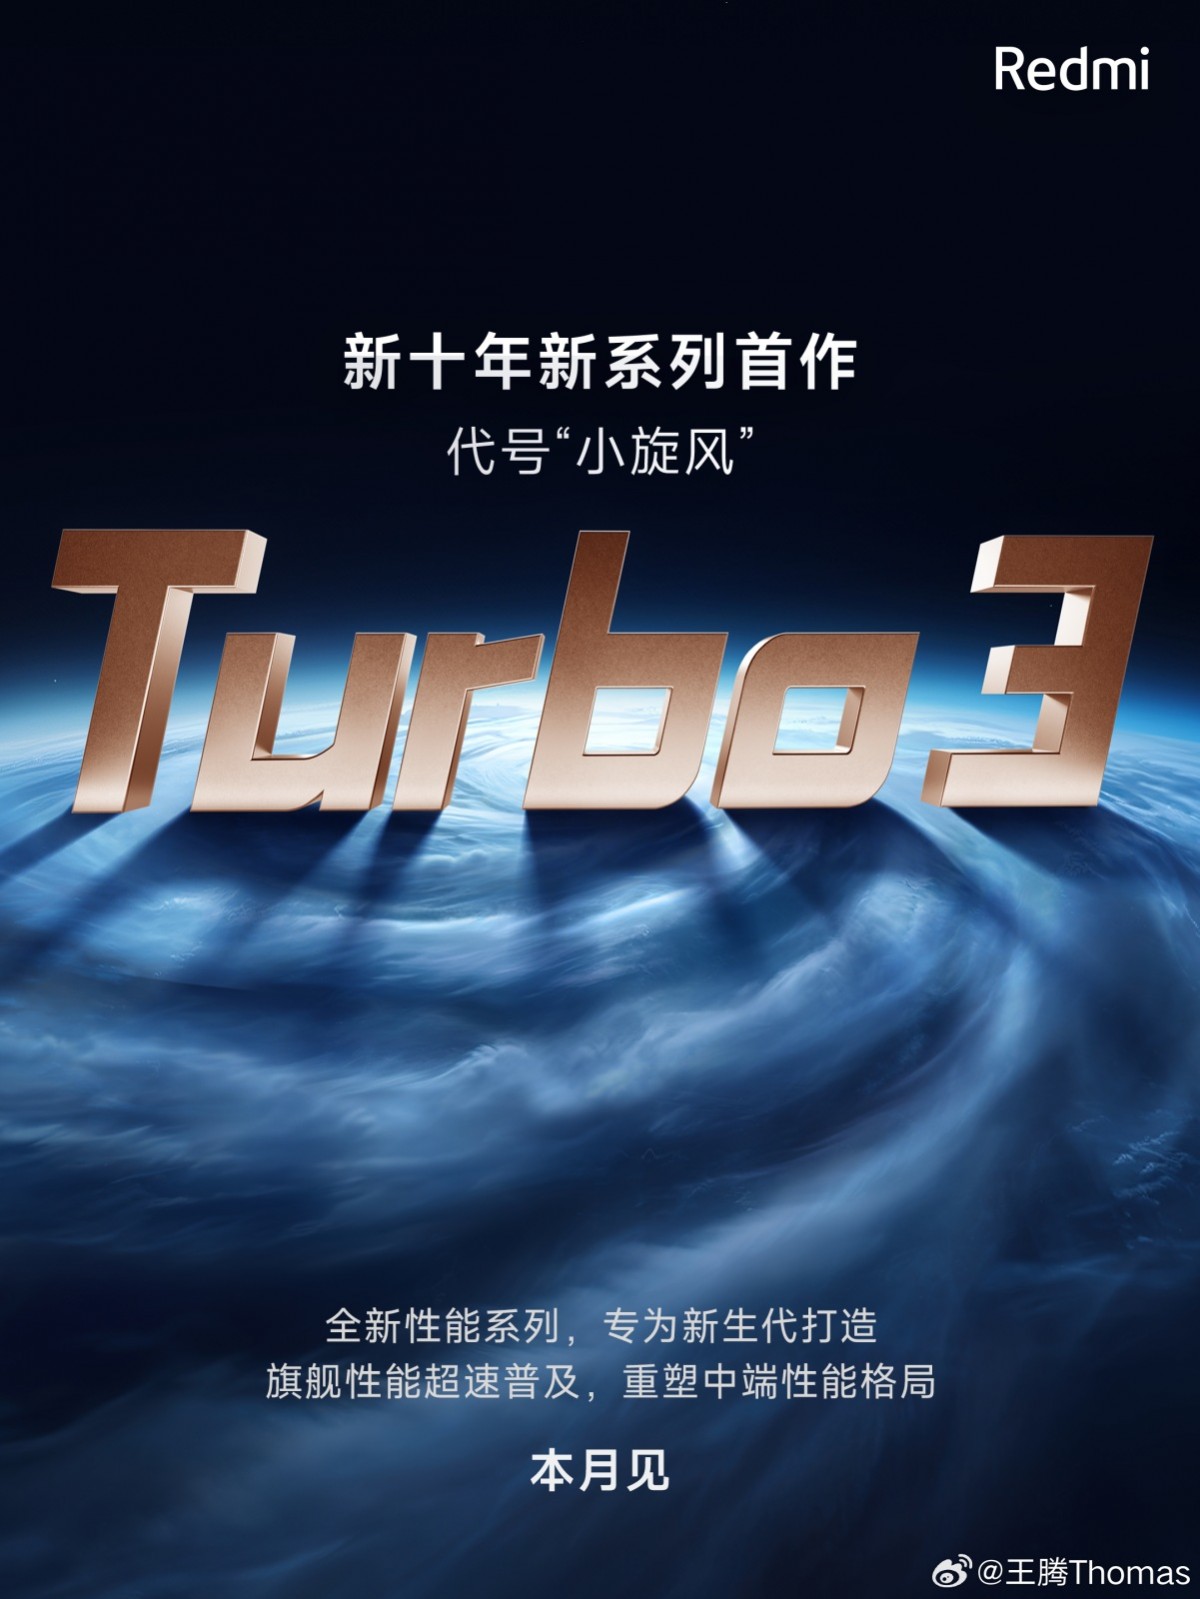 Redmi announces Turbo 3 as a part of new generation of performance flagship series